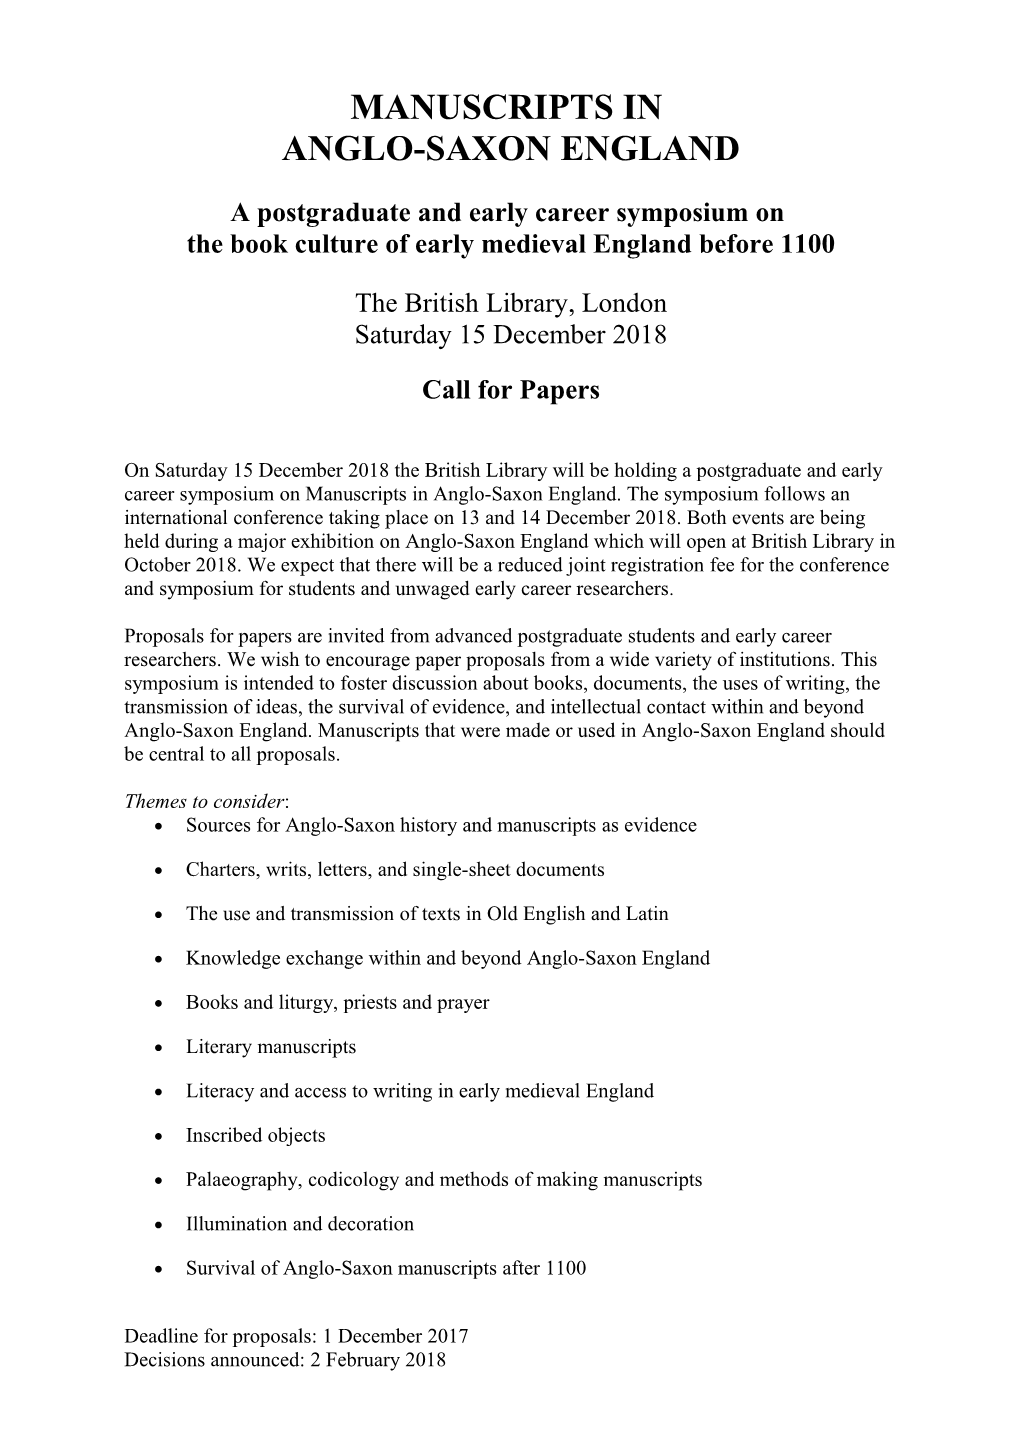 Manuscripts in Anglo-Saxon England